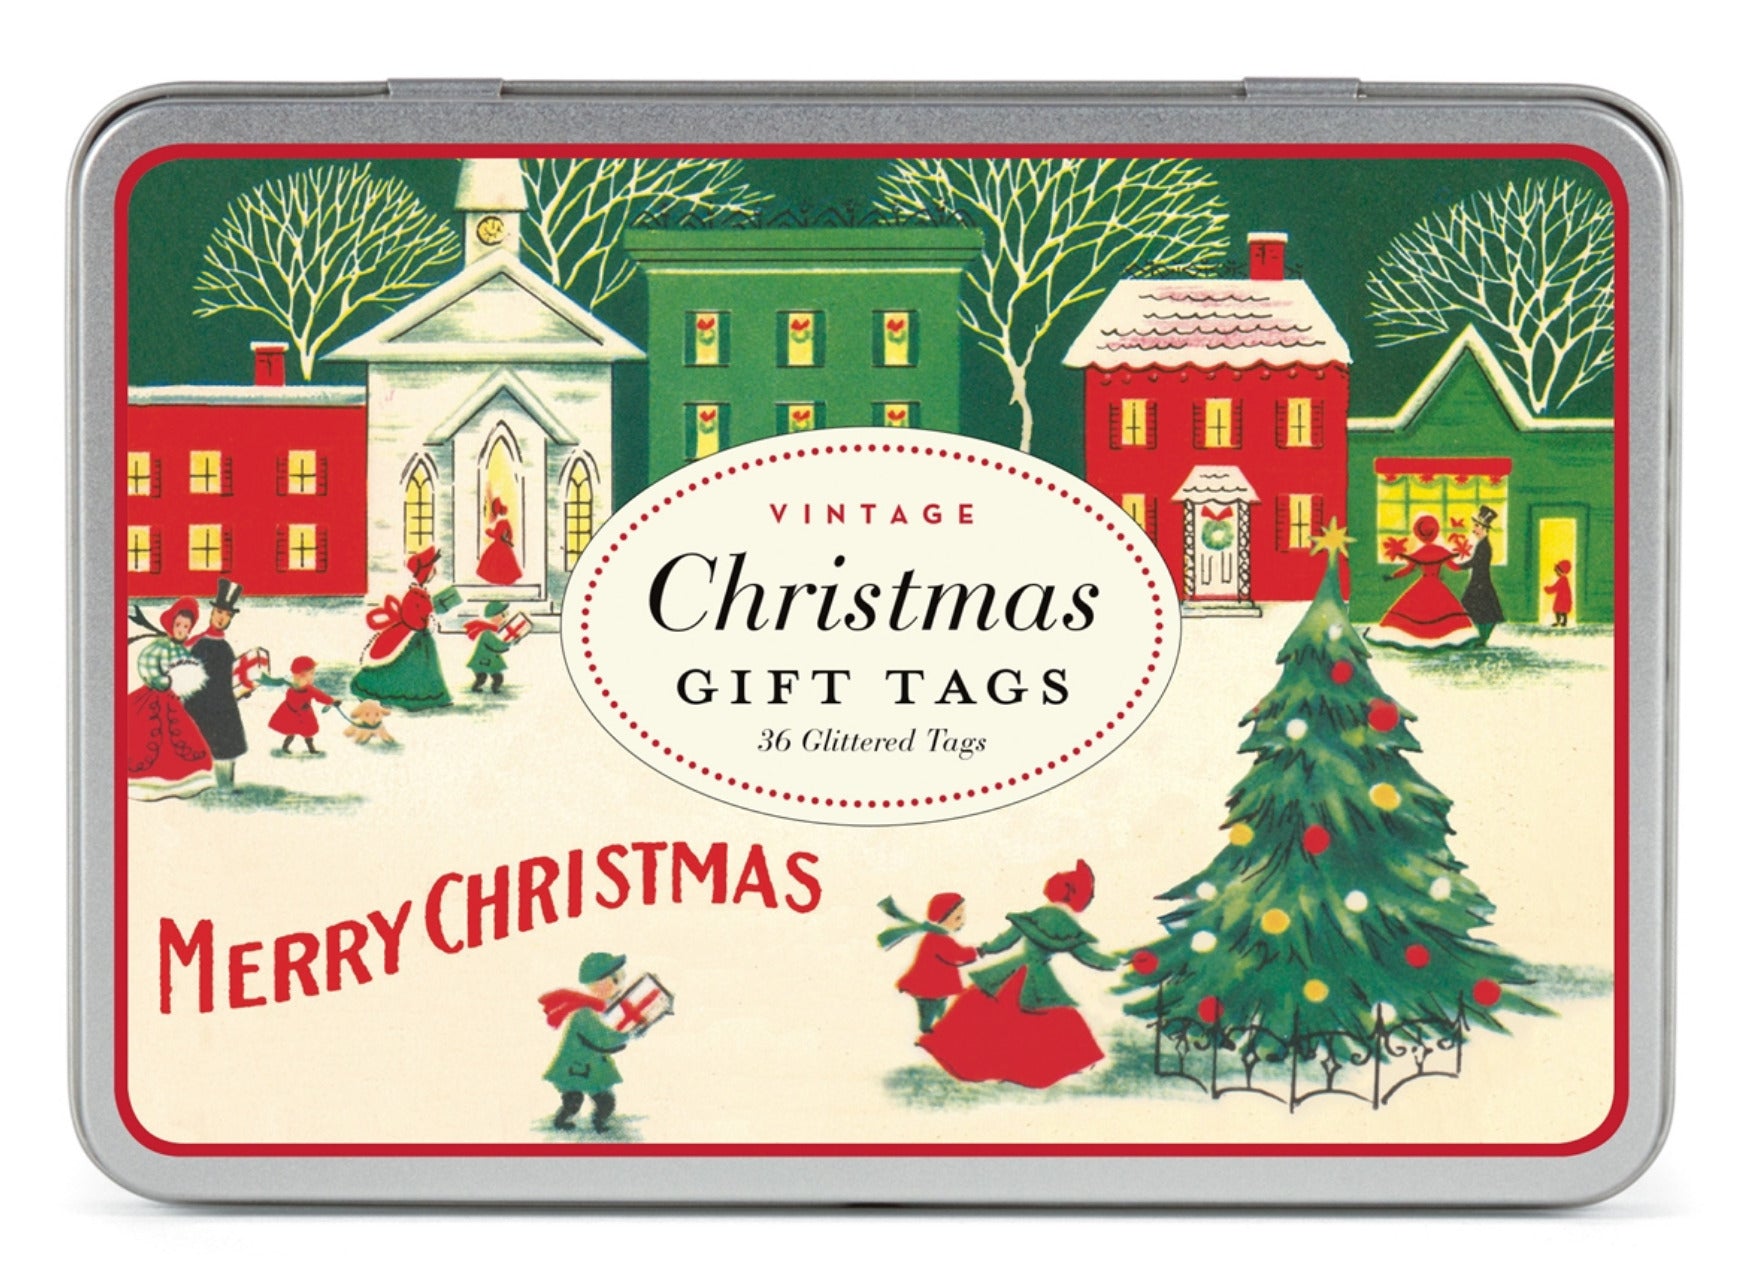 Glittered Vintage-Style Christmas Village Gift Tags - B